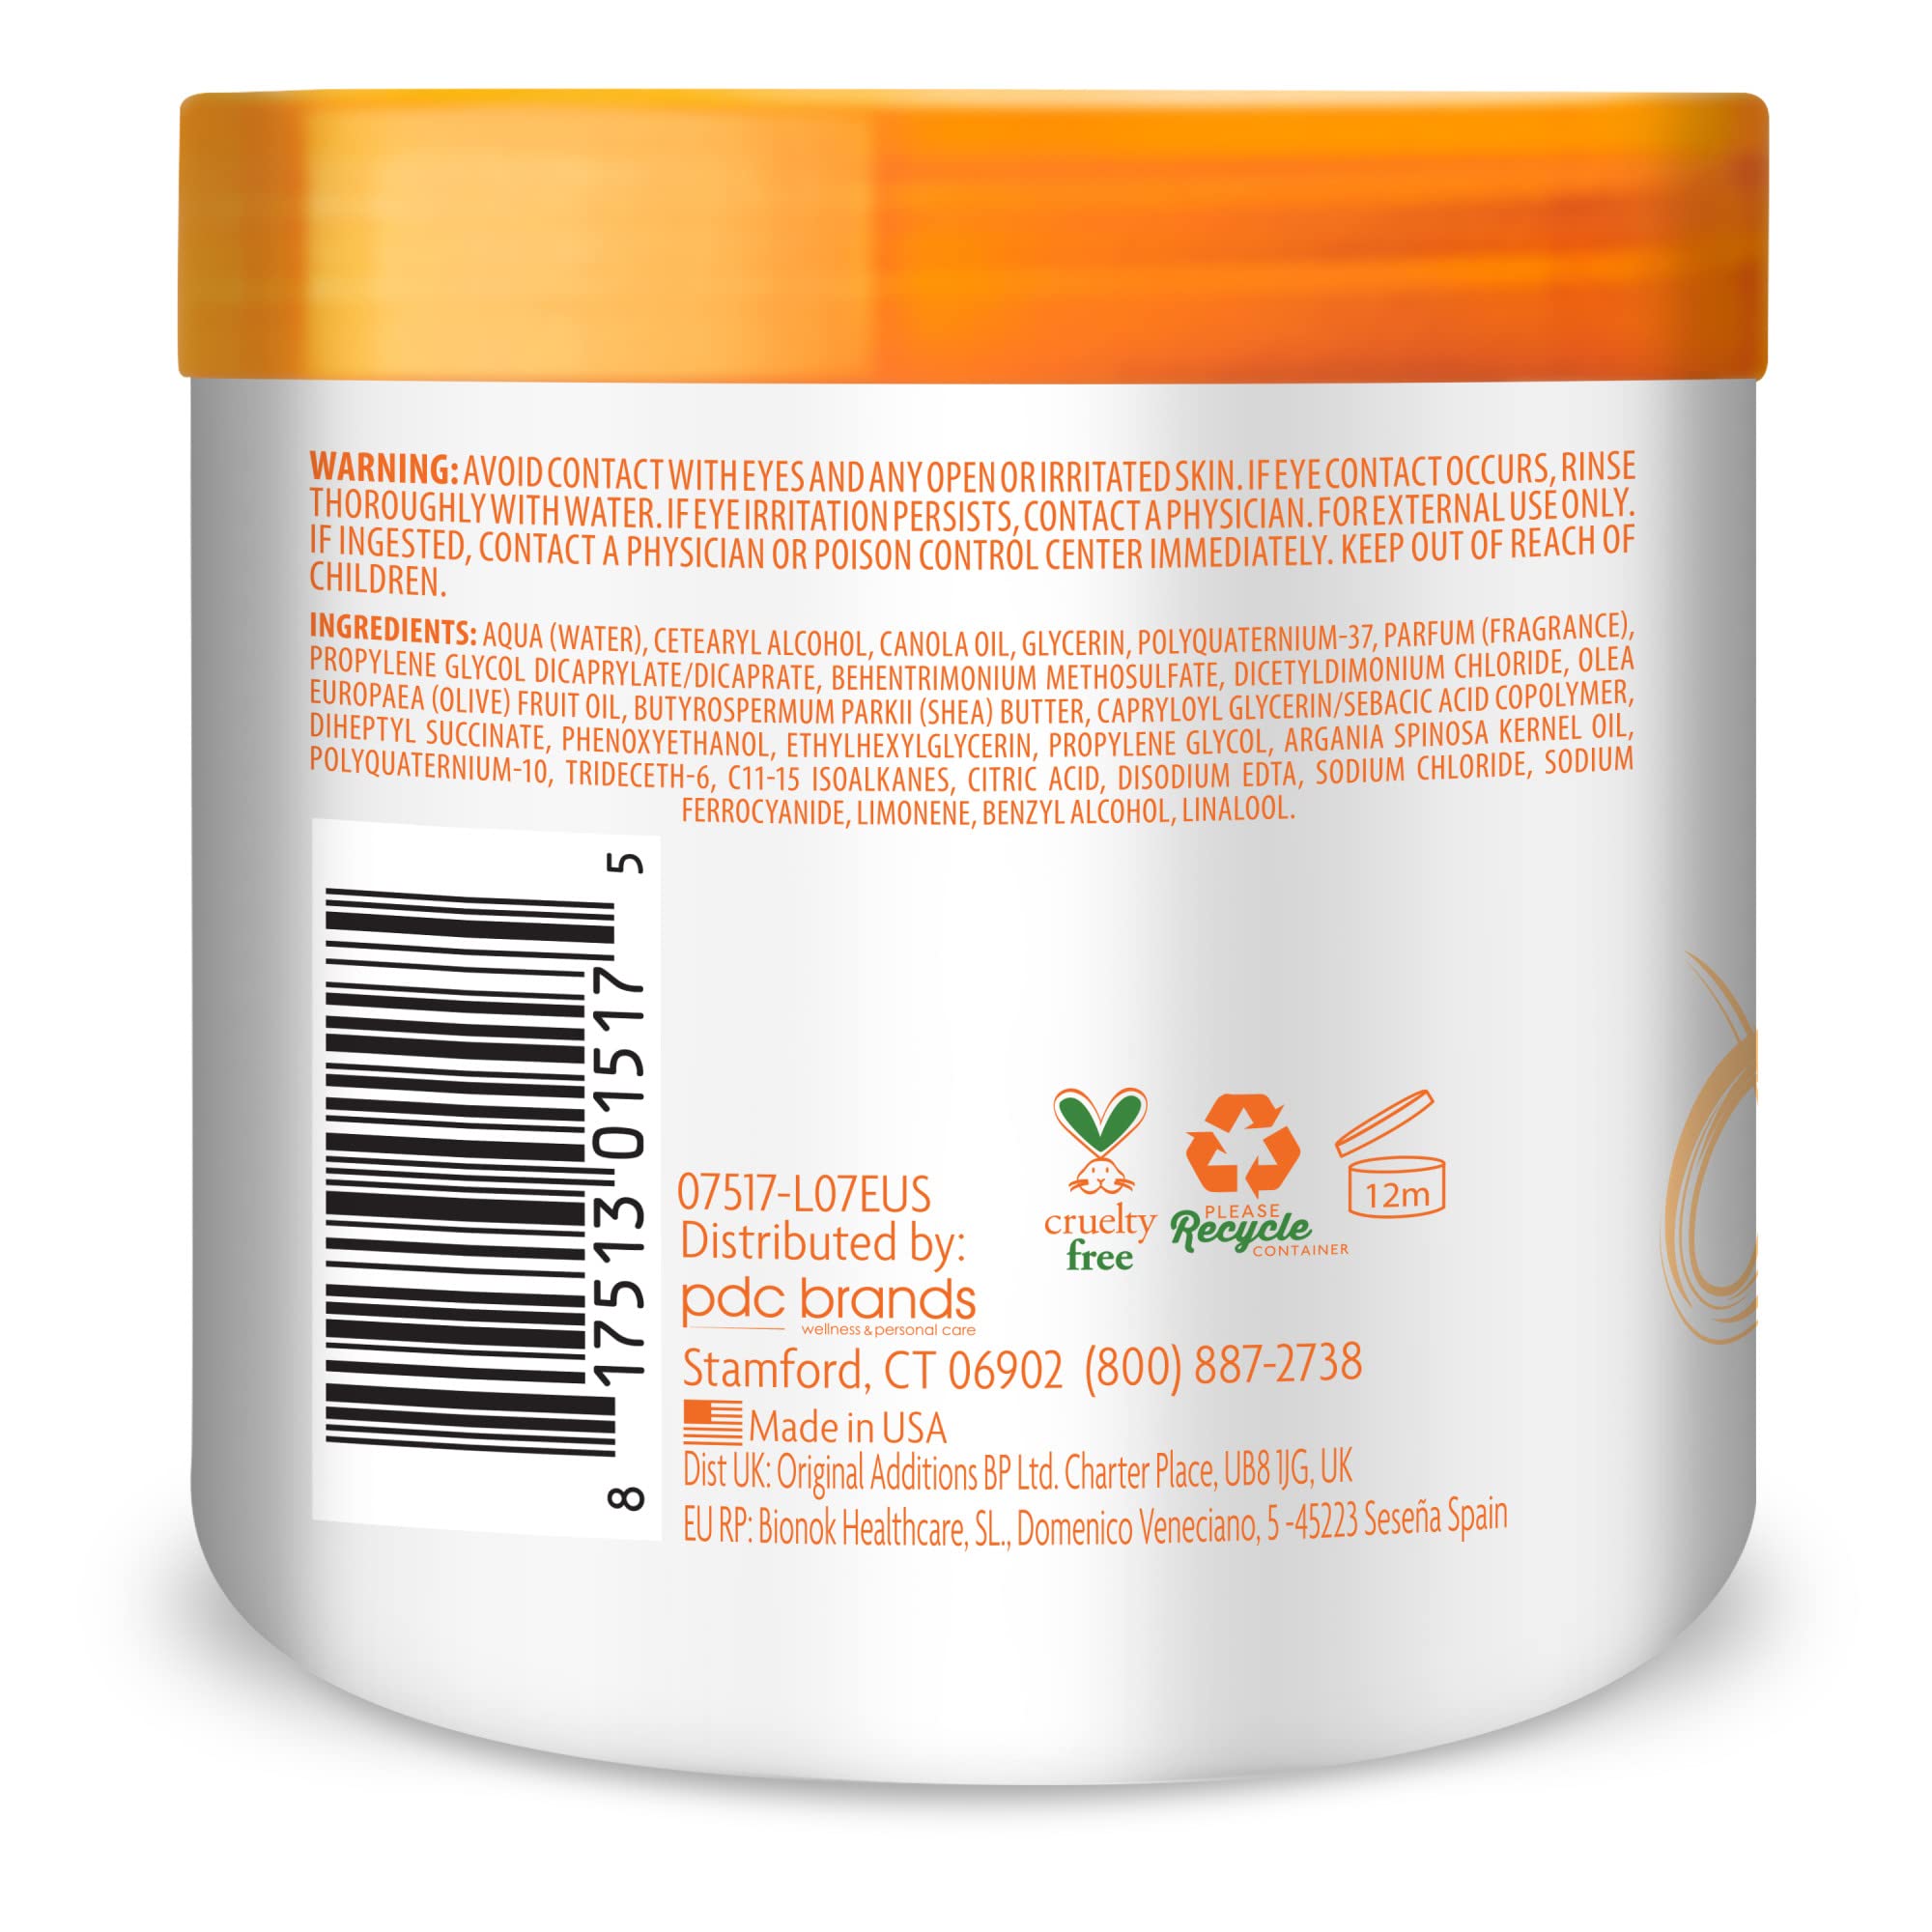 Cantu Leave-In Conditioning Repair Cream with Argan Oil, 16 oz (Pack of 2) (Packaging May Vary)